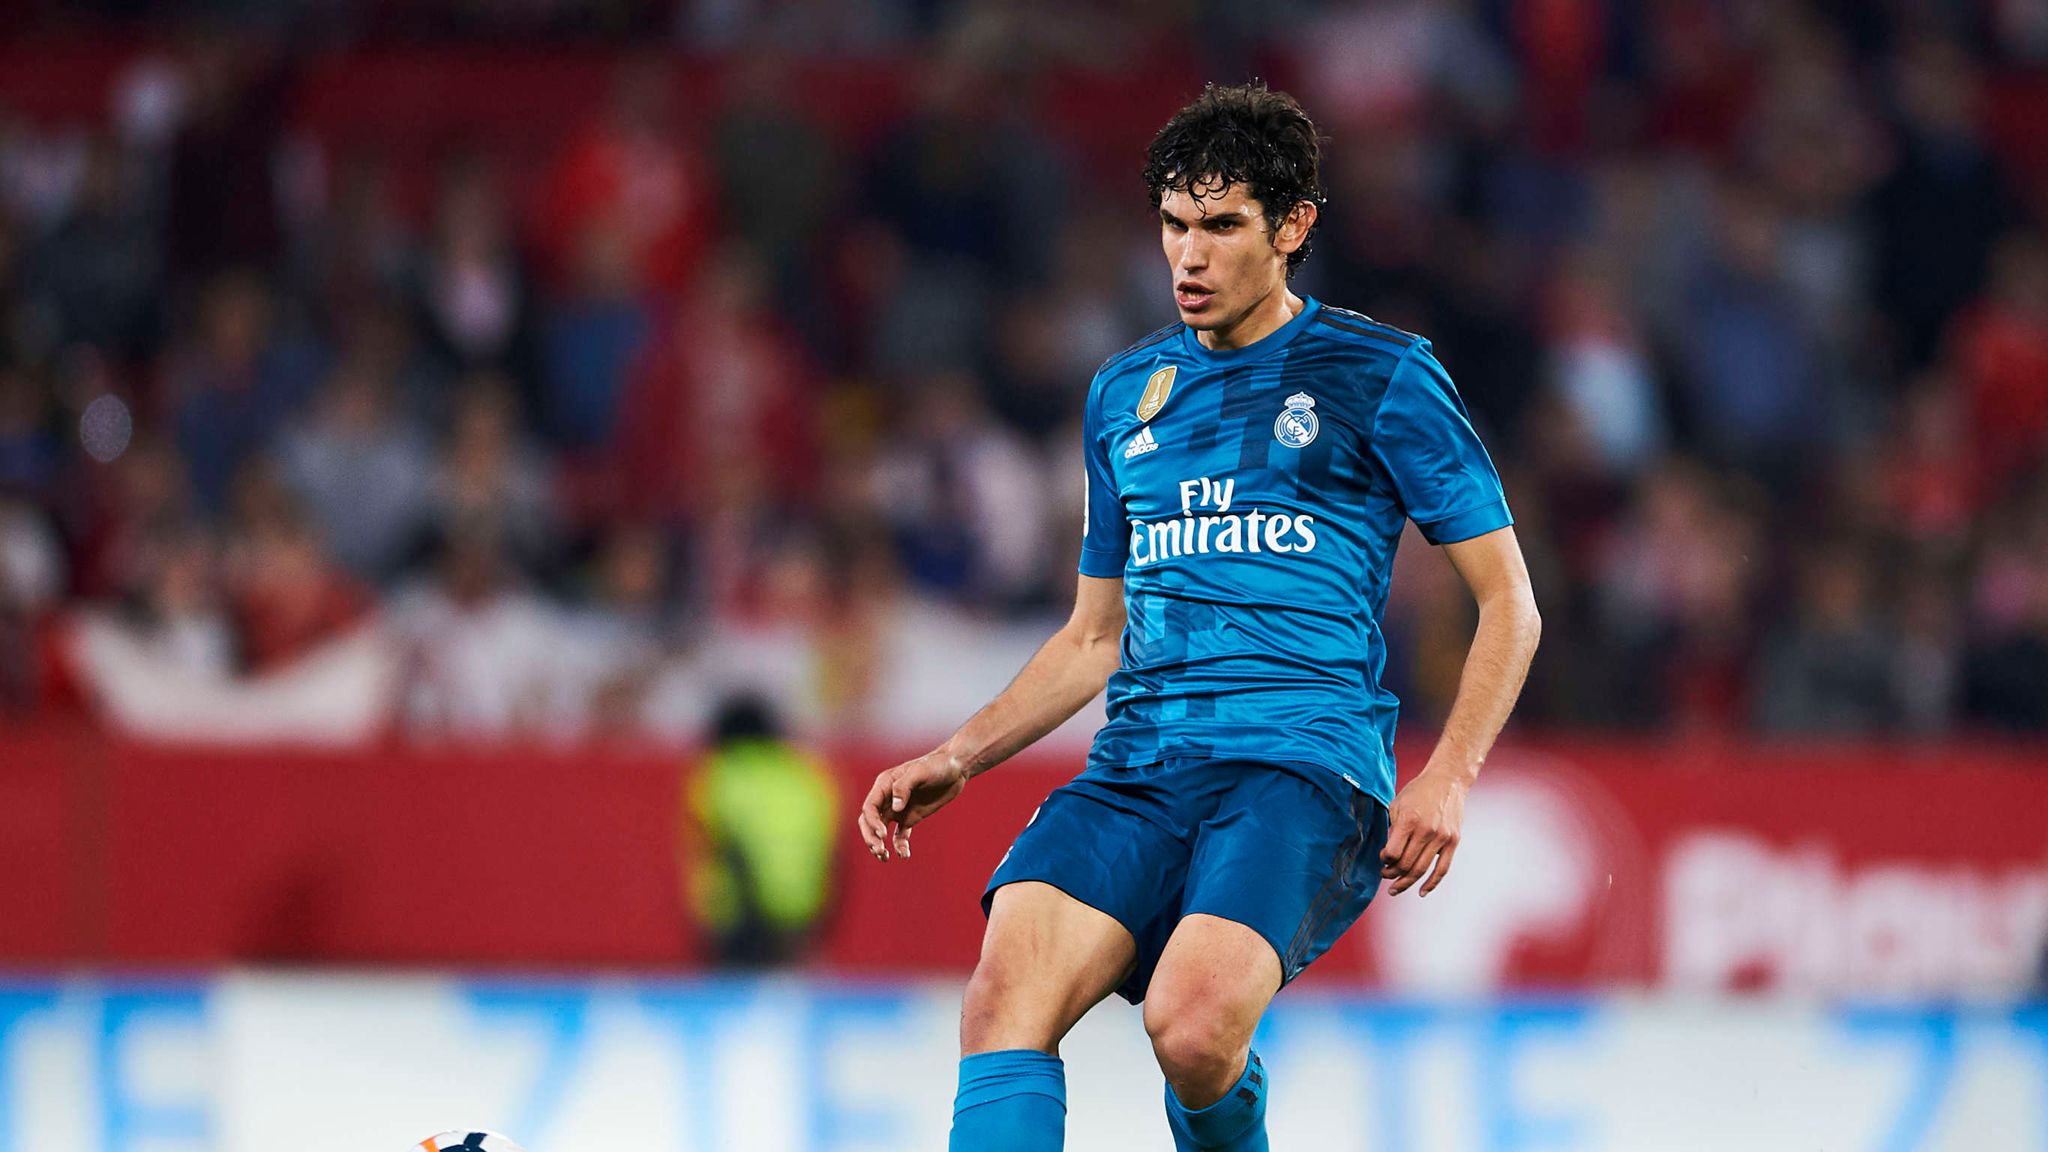 Vallejo set to join Granada on loan deal -report - Managing Madrid